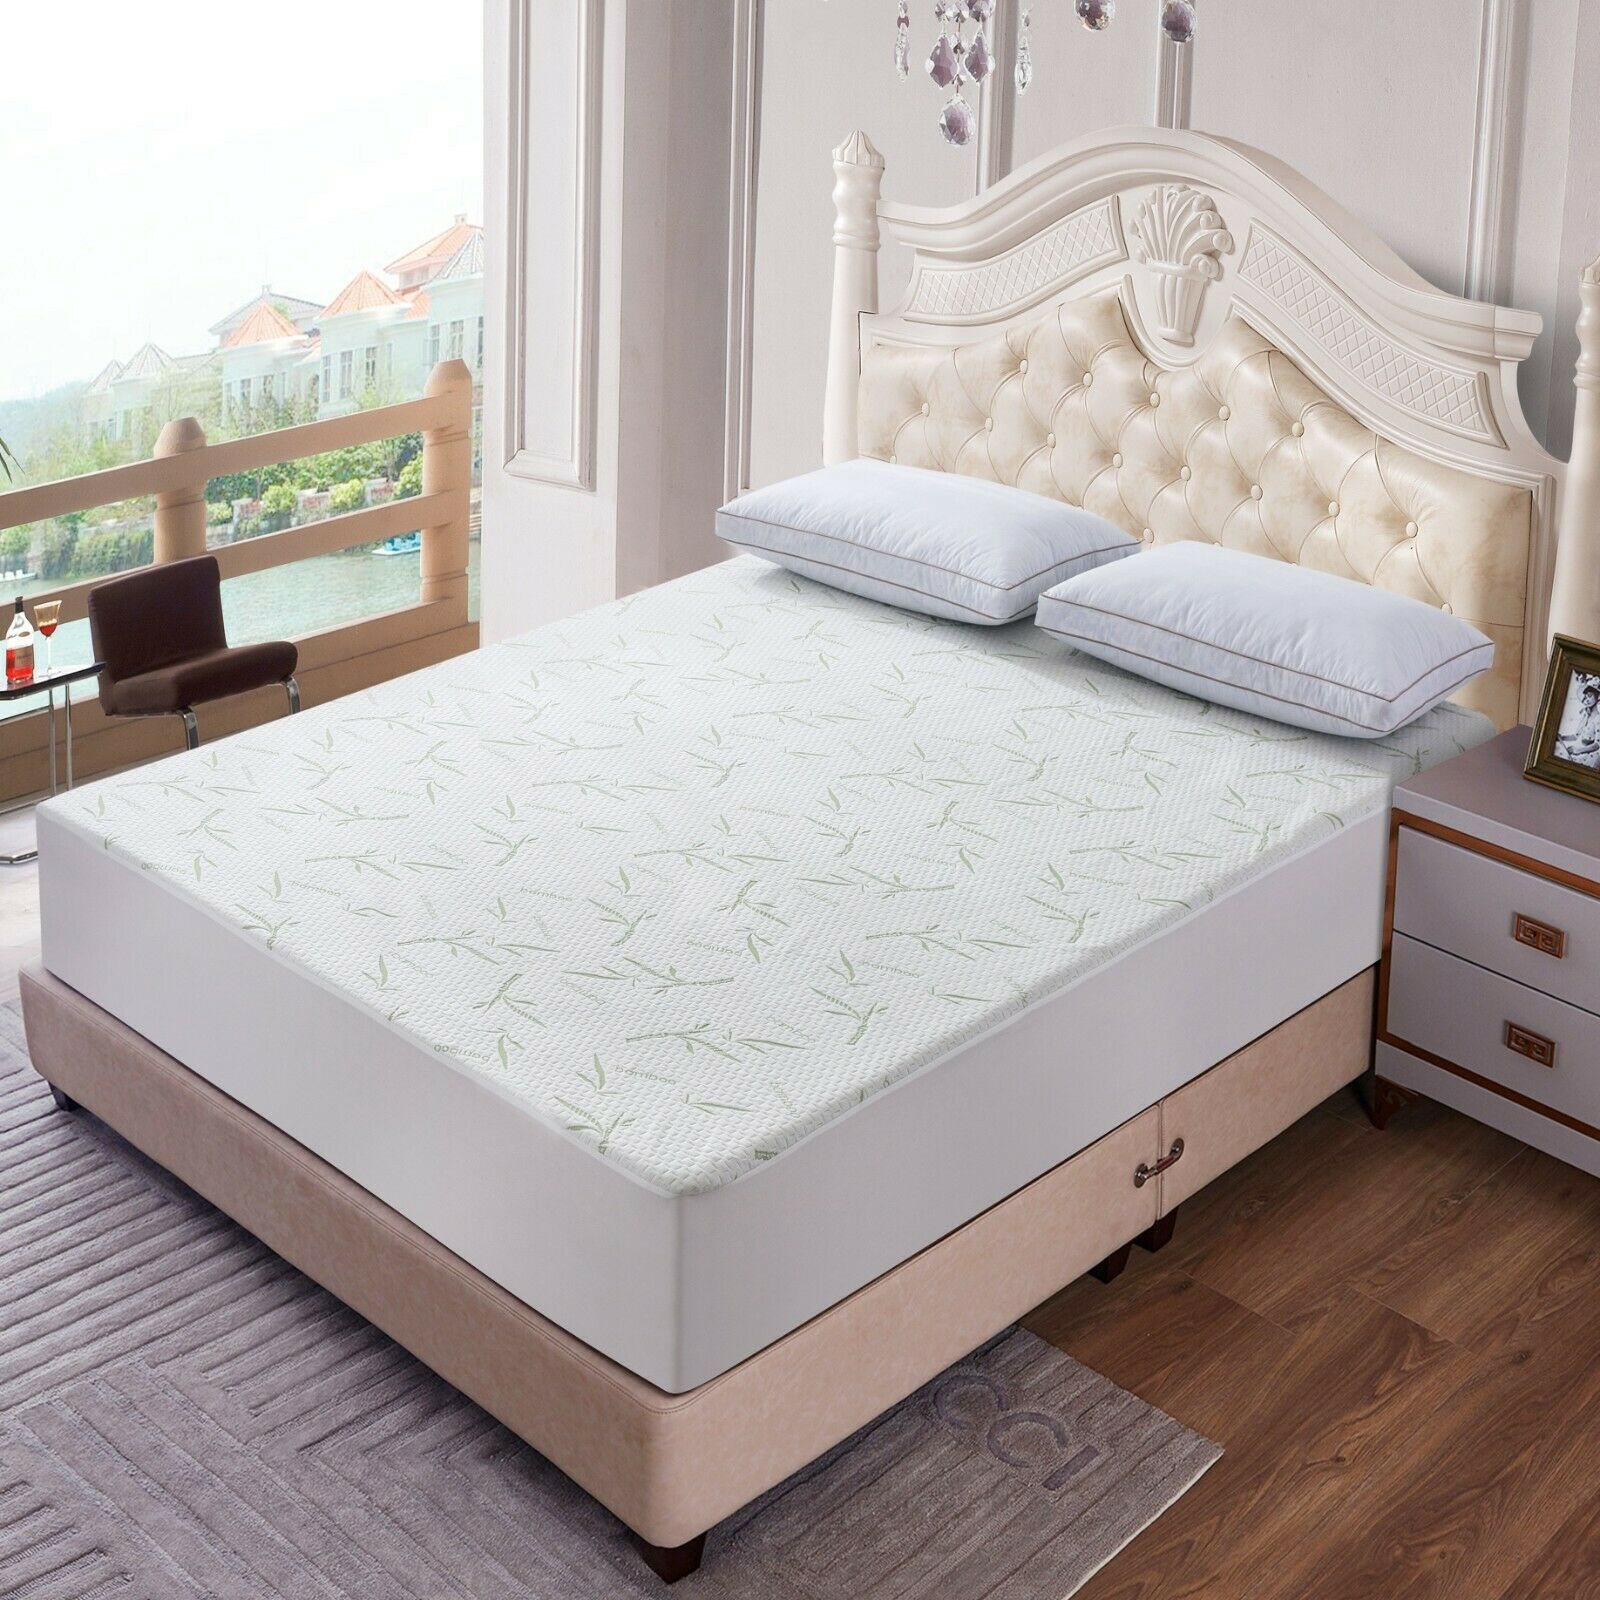 BAMBOO Mattress Protector Waterproof Soft Hypoallergenic Fitted Cover-Queen 